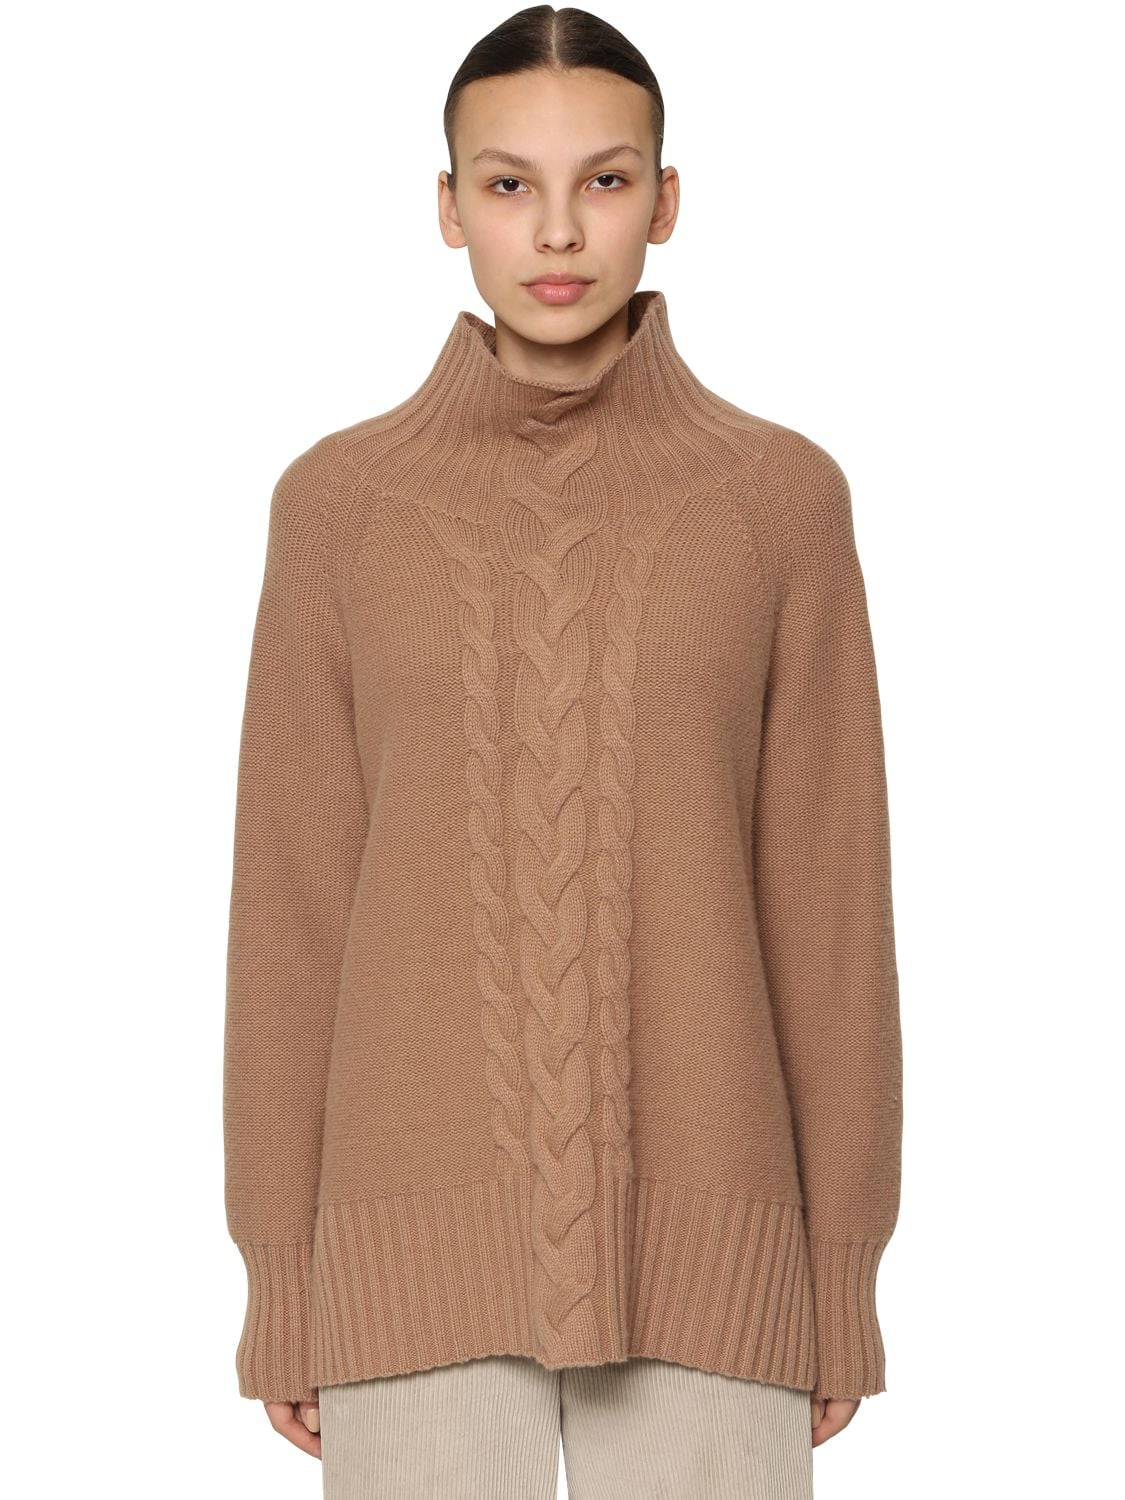 MAX MARA WOOL & CASHMERE CABLE KNIT SWEATER,70I519018-MDE20